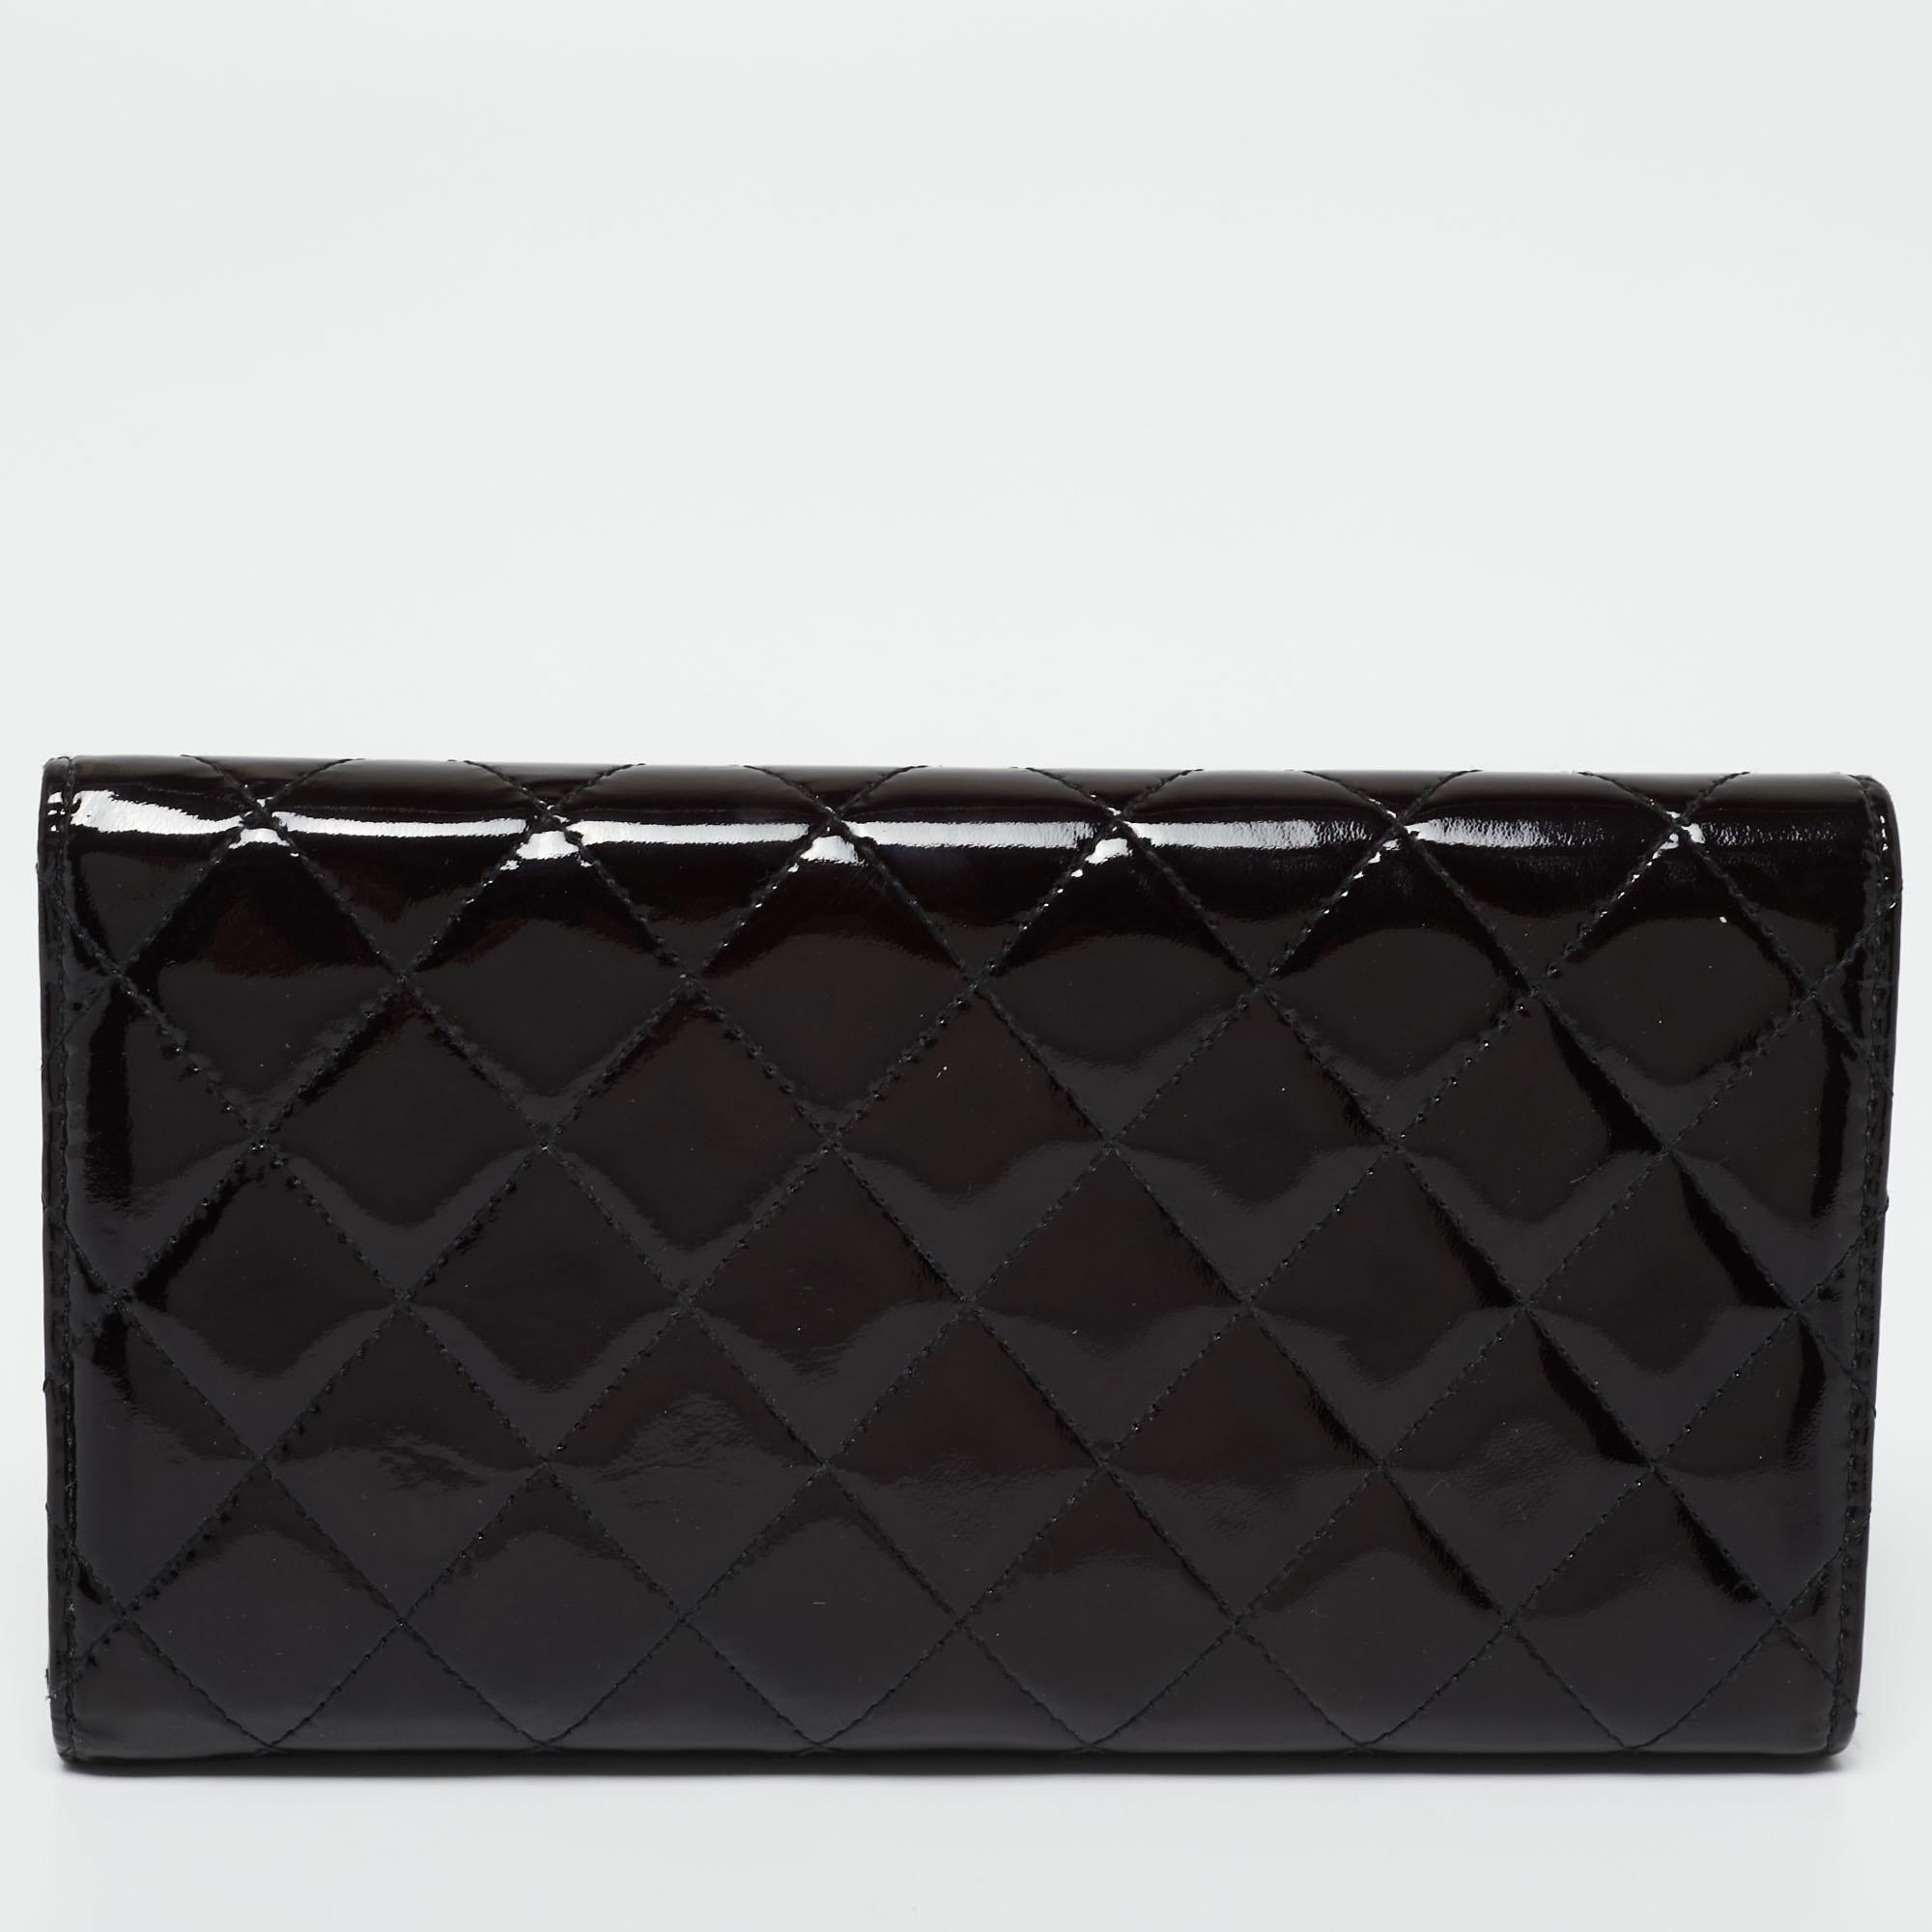 Store all your essentials securely in this exquisite continental wallet from the House of Chanel. It is crafted from black quilted patent leather, with a CC logo accent detailing the front. The leather-nylon interior grants you ample storage space.